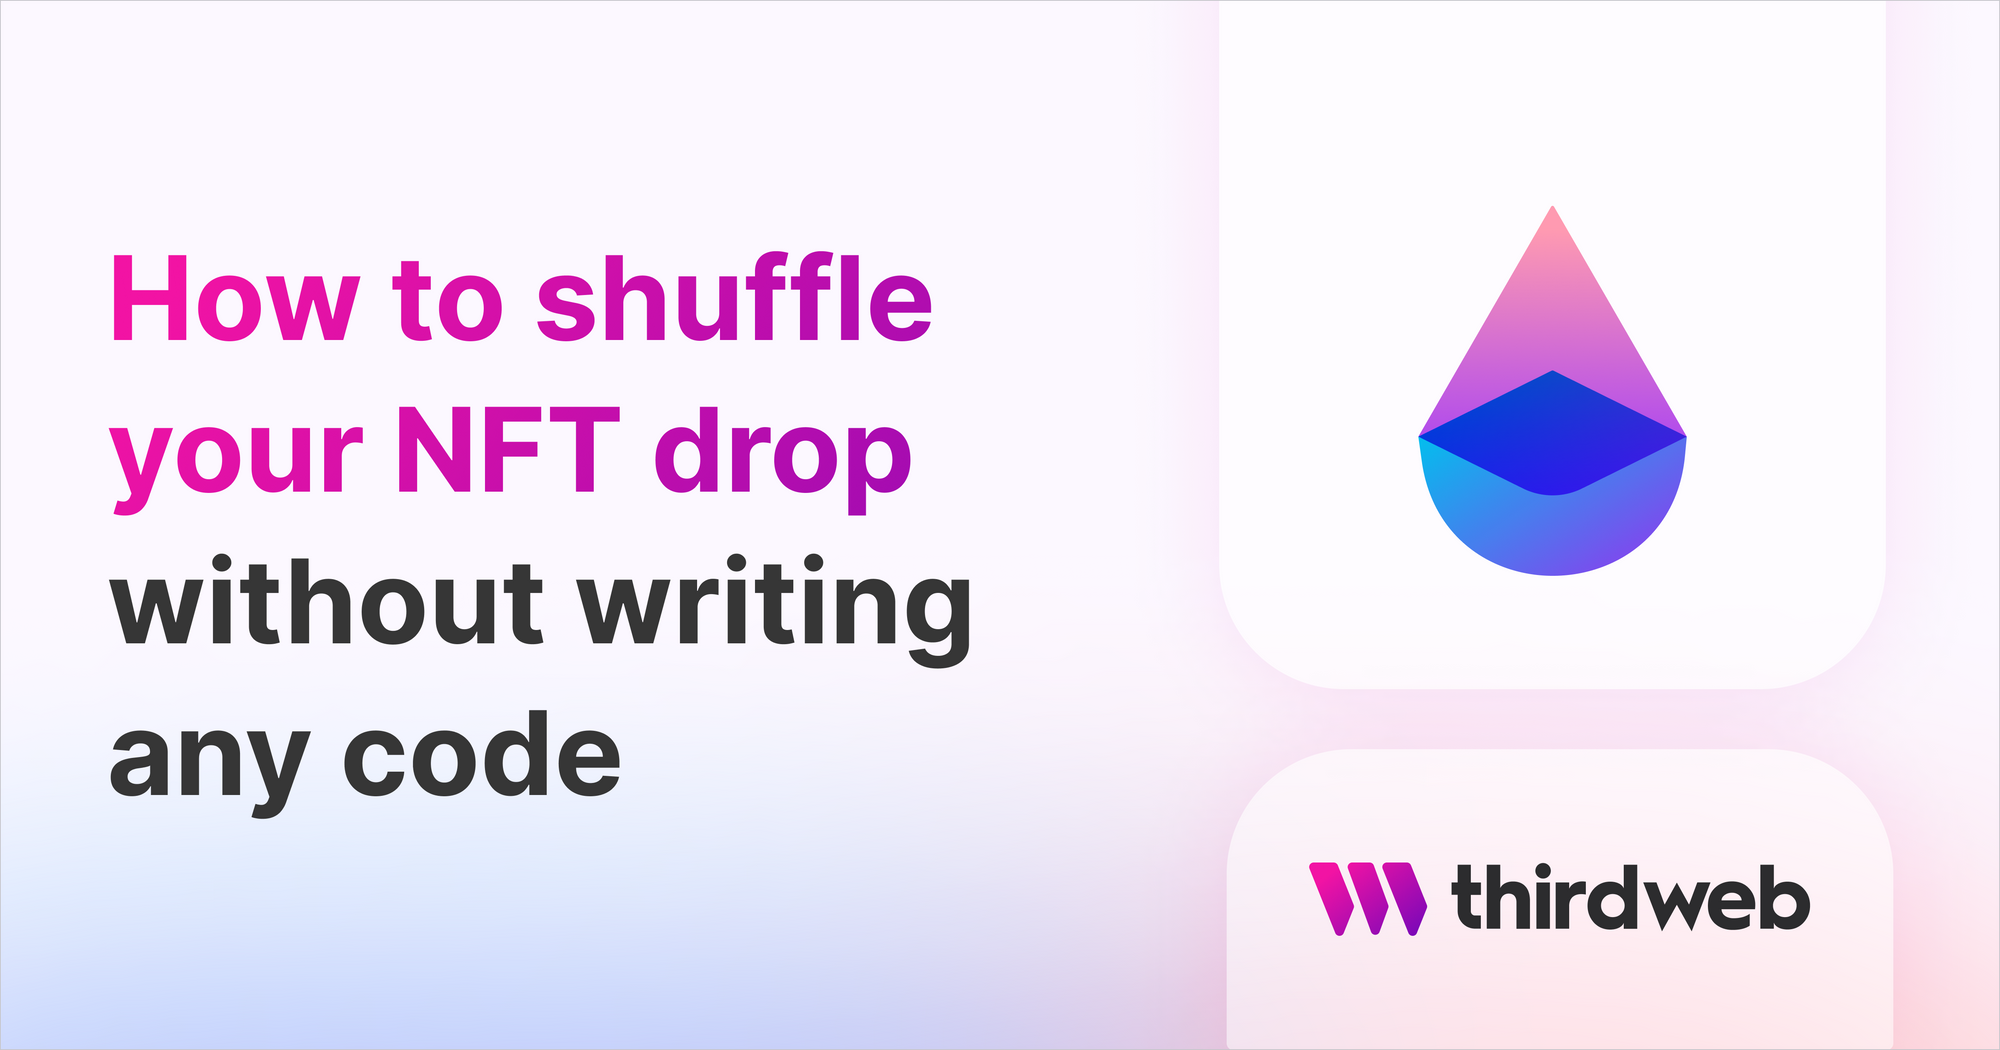 Shuffle your NFT drop without writing any code